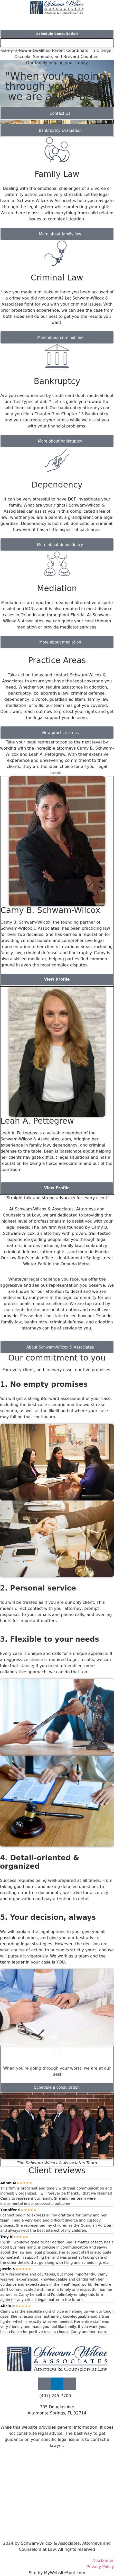 Schwam-Wilcox & Associates, Attorneys and Counselors at Law - Sebring FL Lawyers